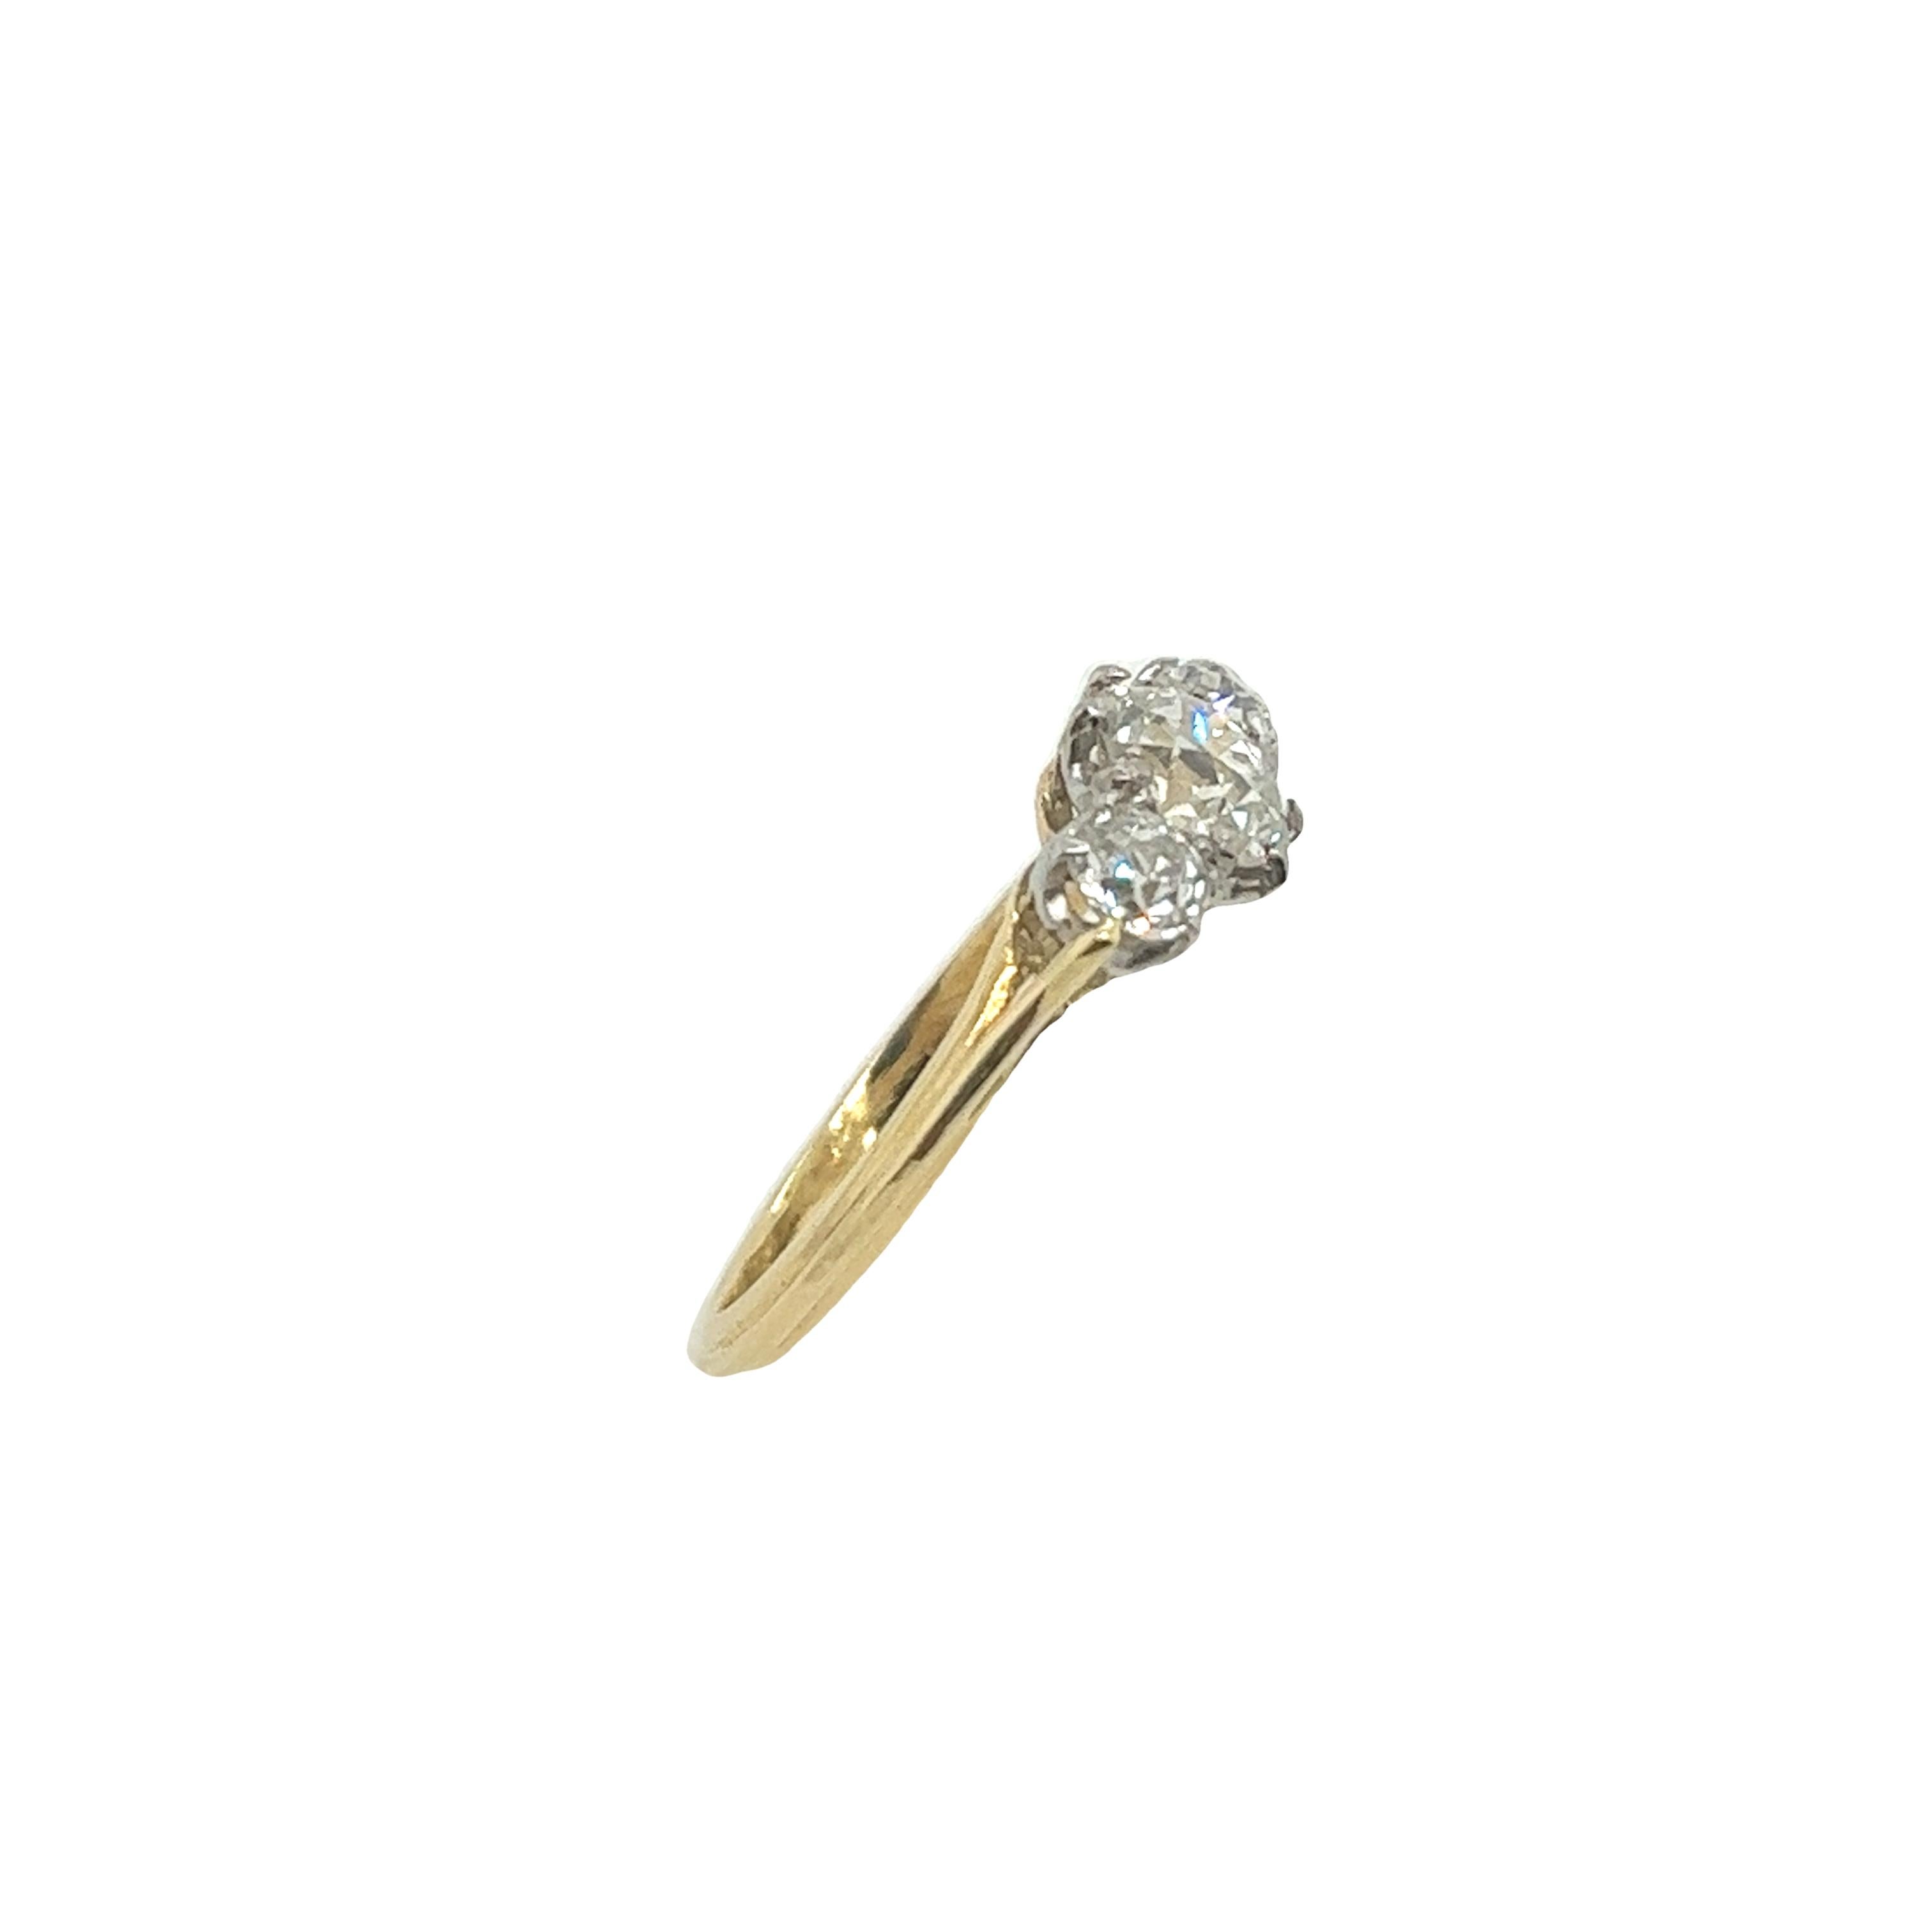 Women's Art Deco 3-Stone Ring, Set With 1.62ct of Old European Cut Diamonds in 18ct Gold